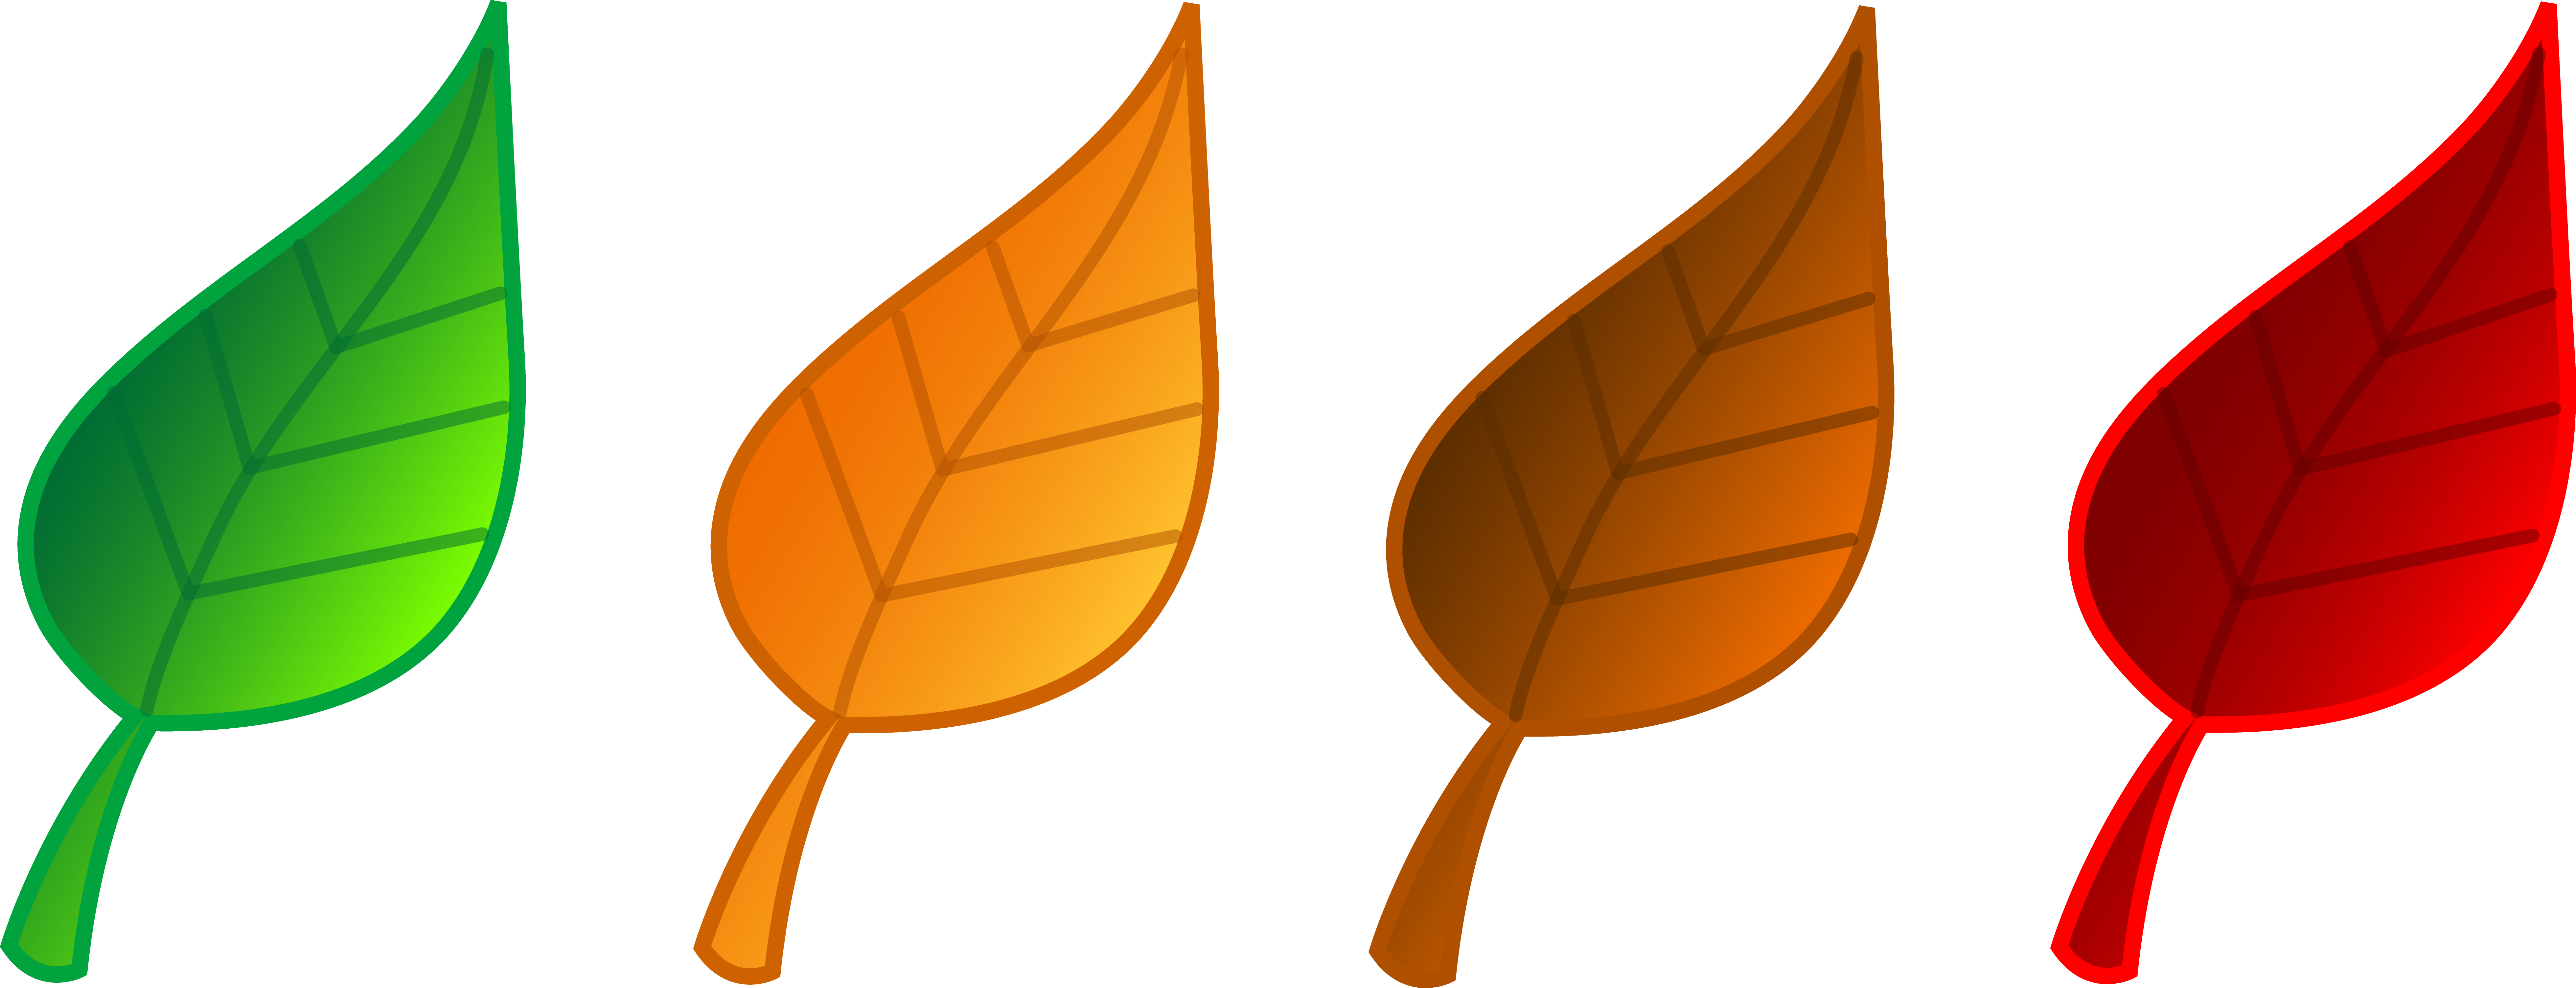 Fall Leaves Clip Art Images  Pictures - Becuo